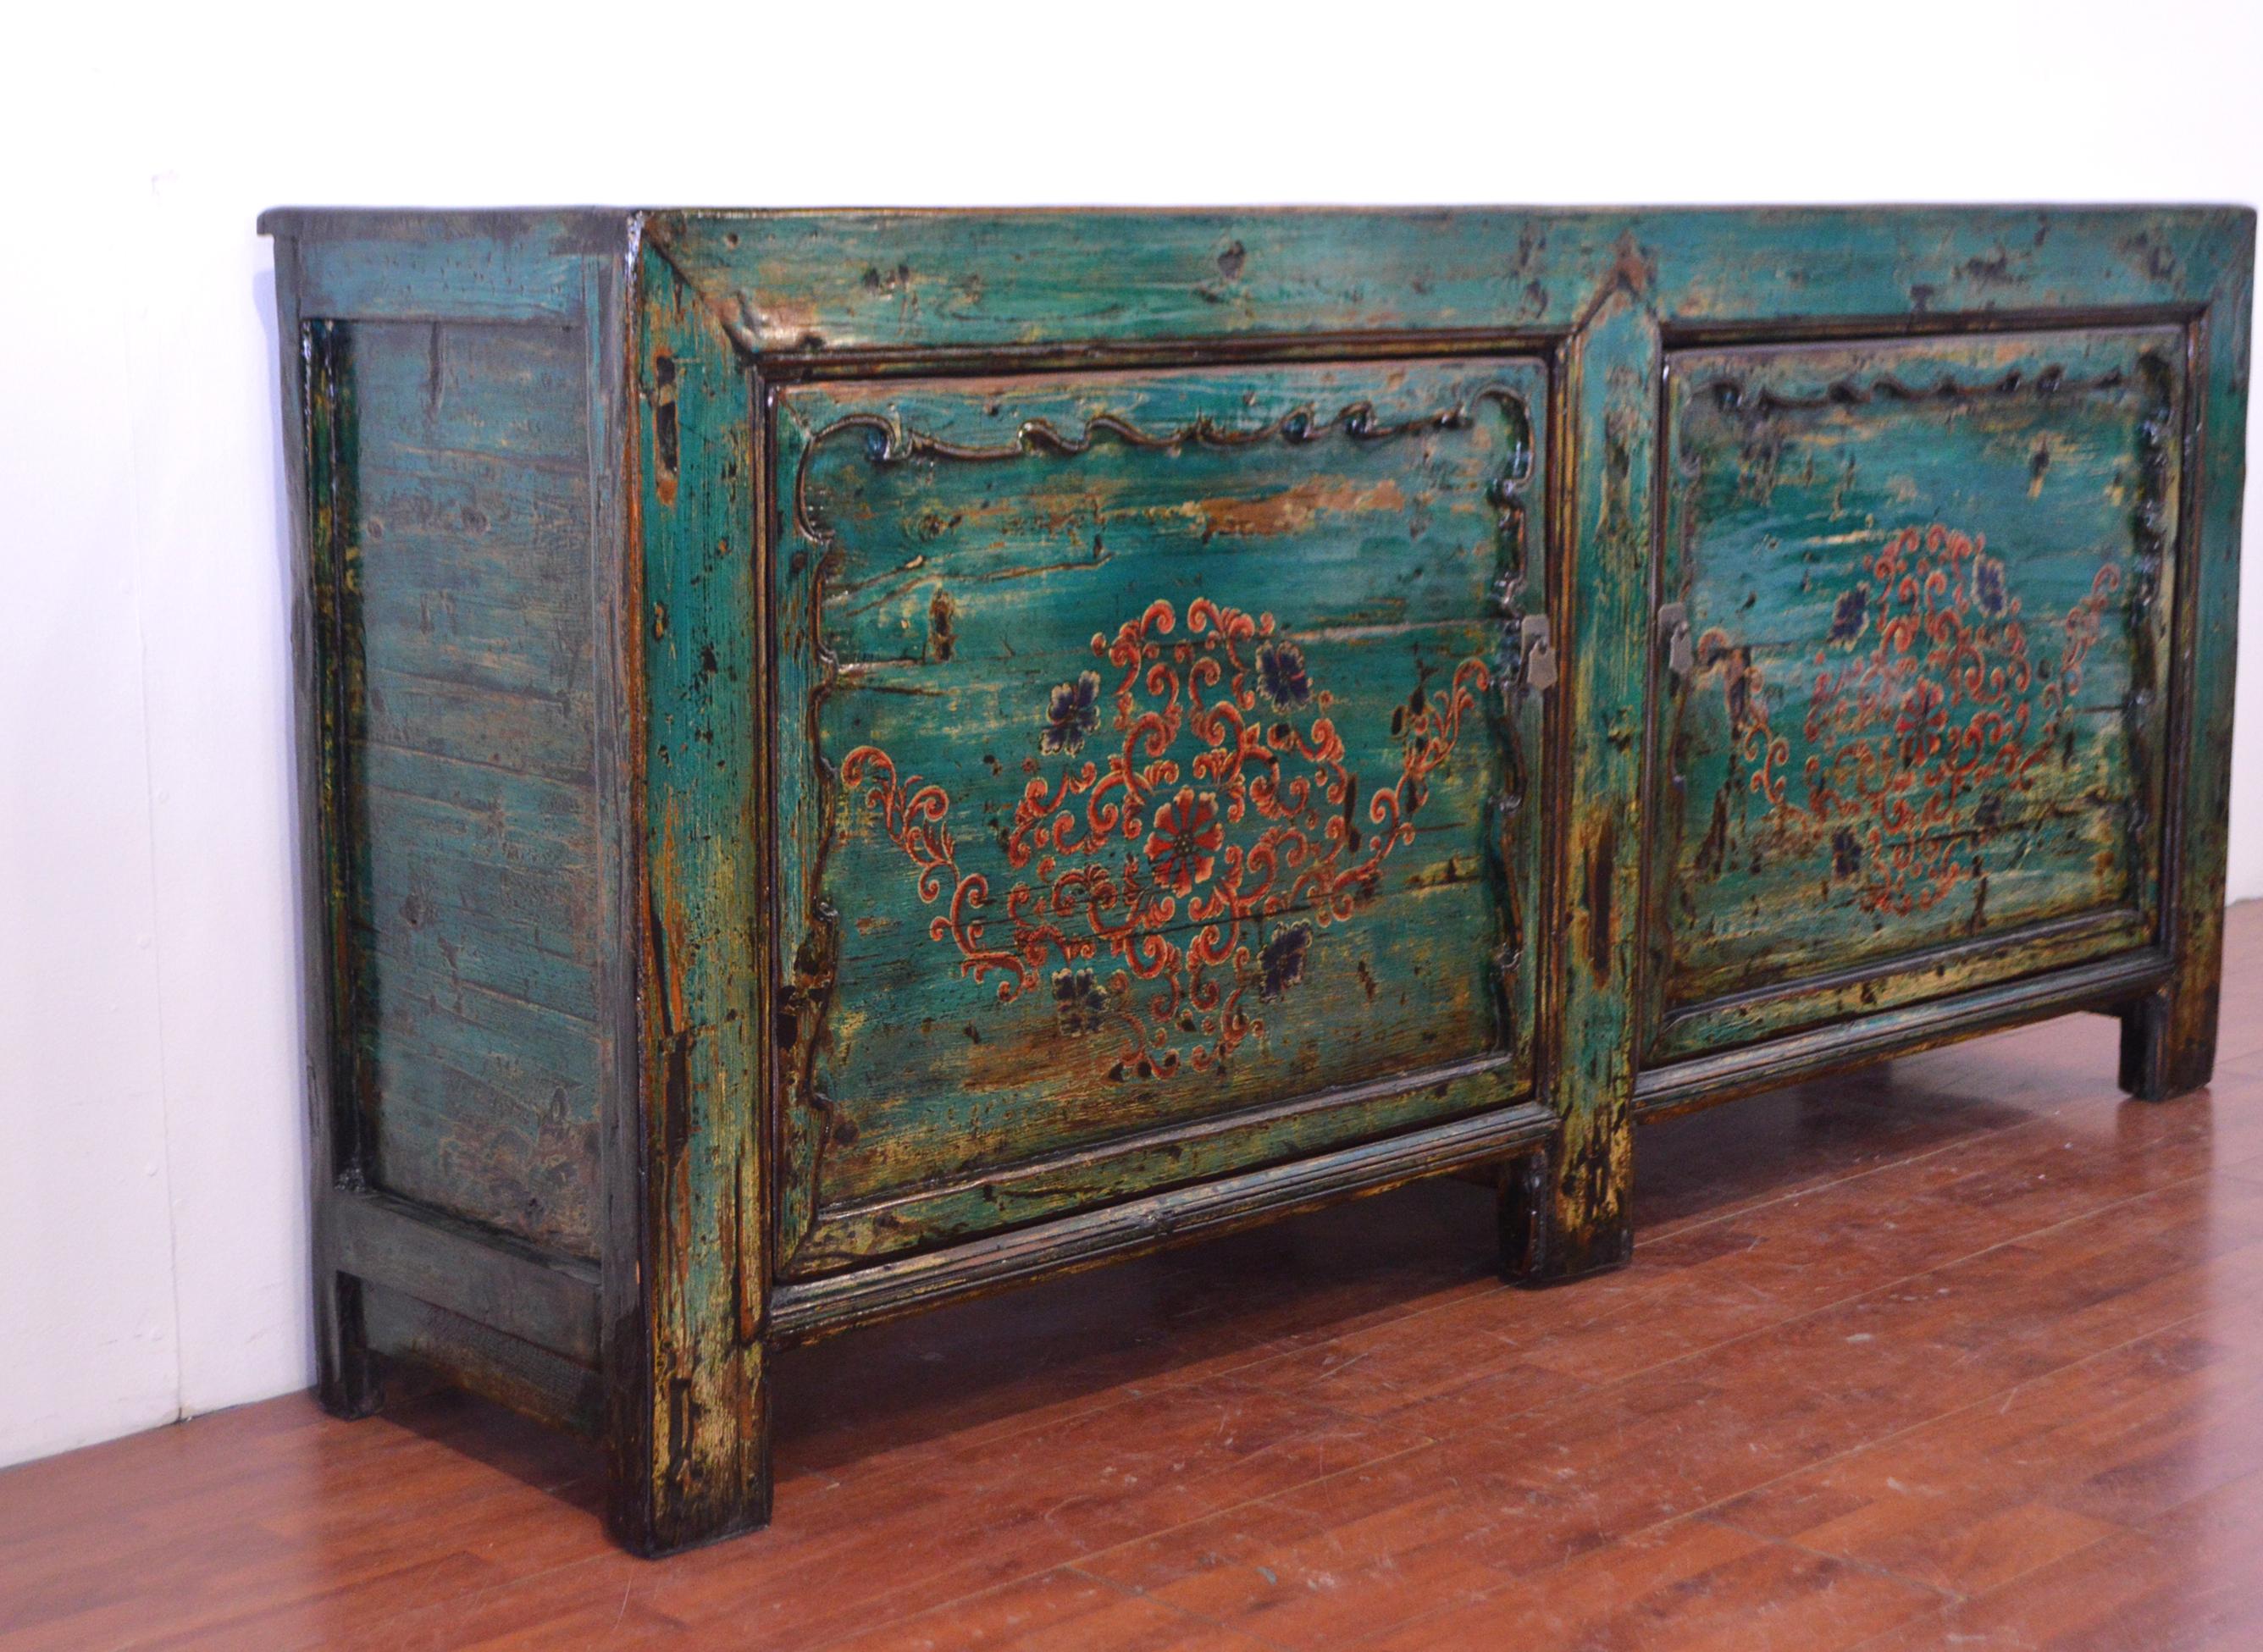 This early 20th century Chinese buffet amazes for its colour: it is composed by two big doors entirely green lacquered like the top where we can see the wood veining. The design on the doors take inspiration from traditional Tibetan decorative art,